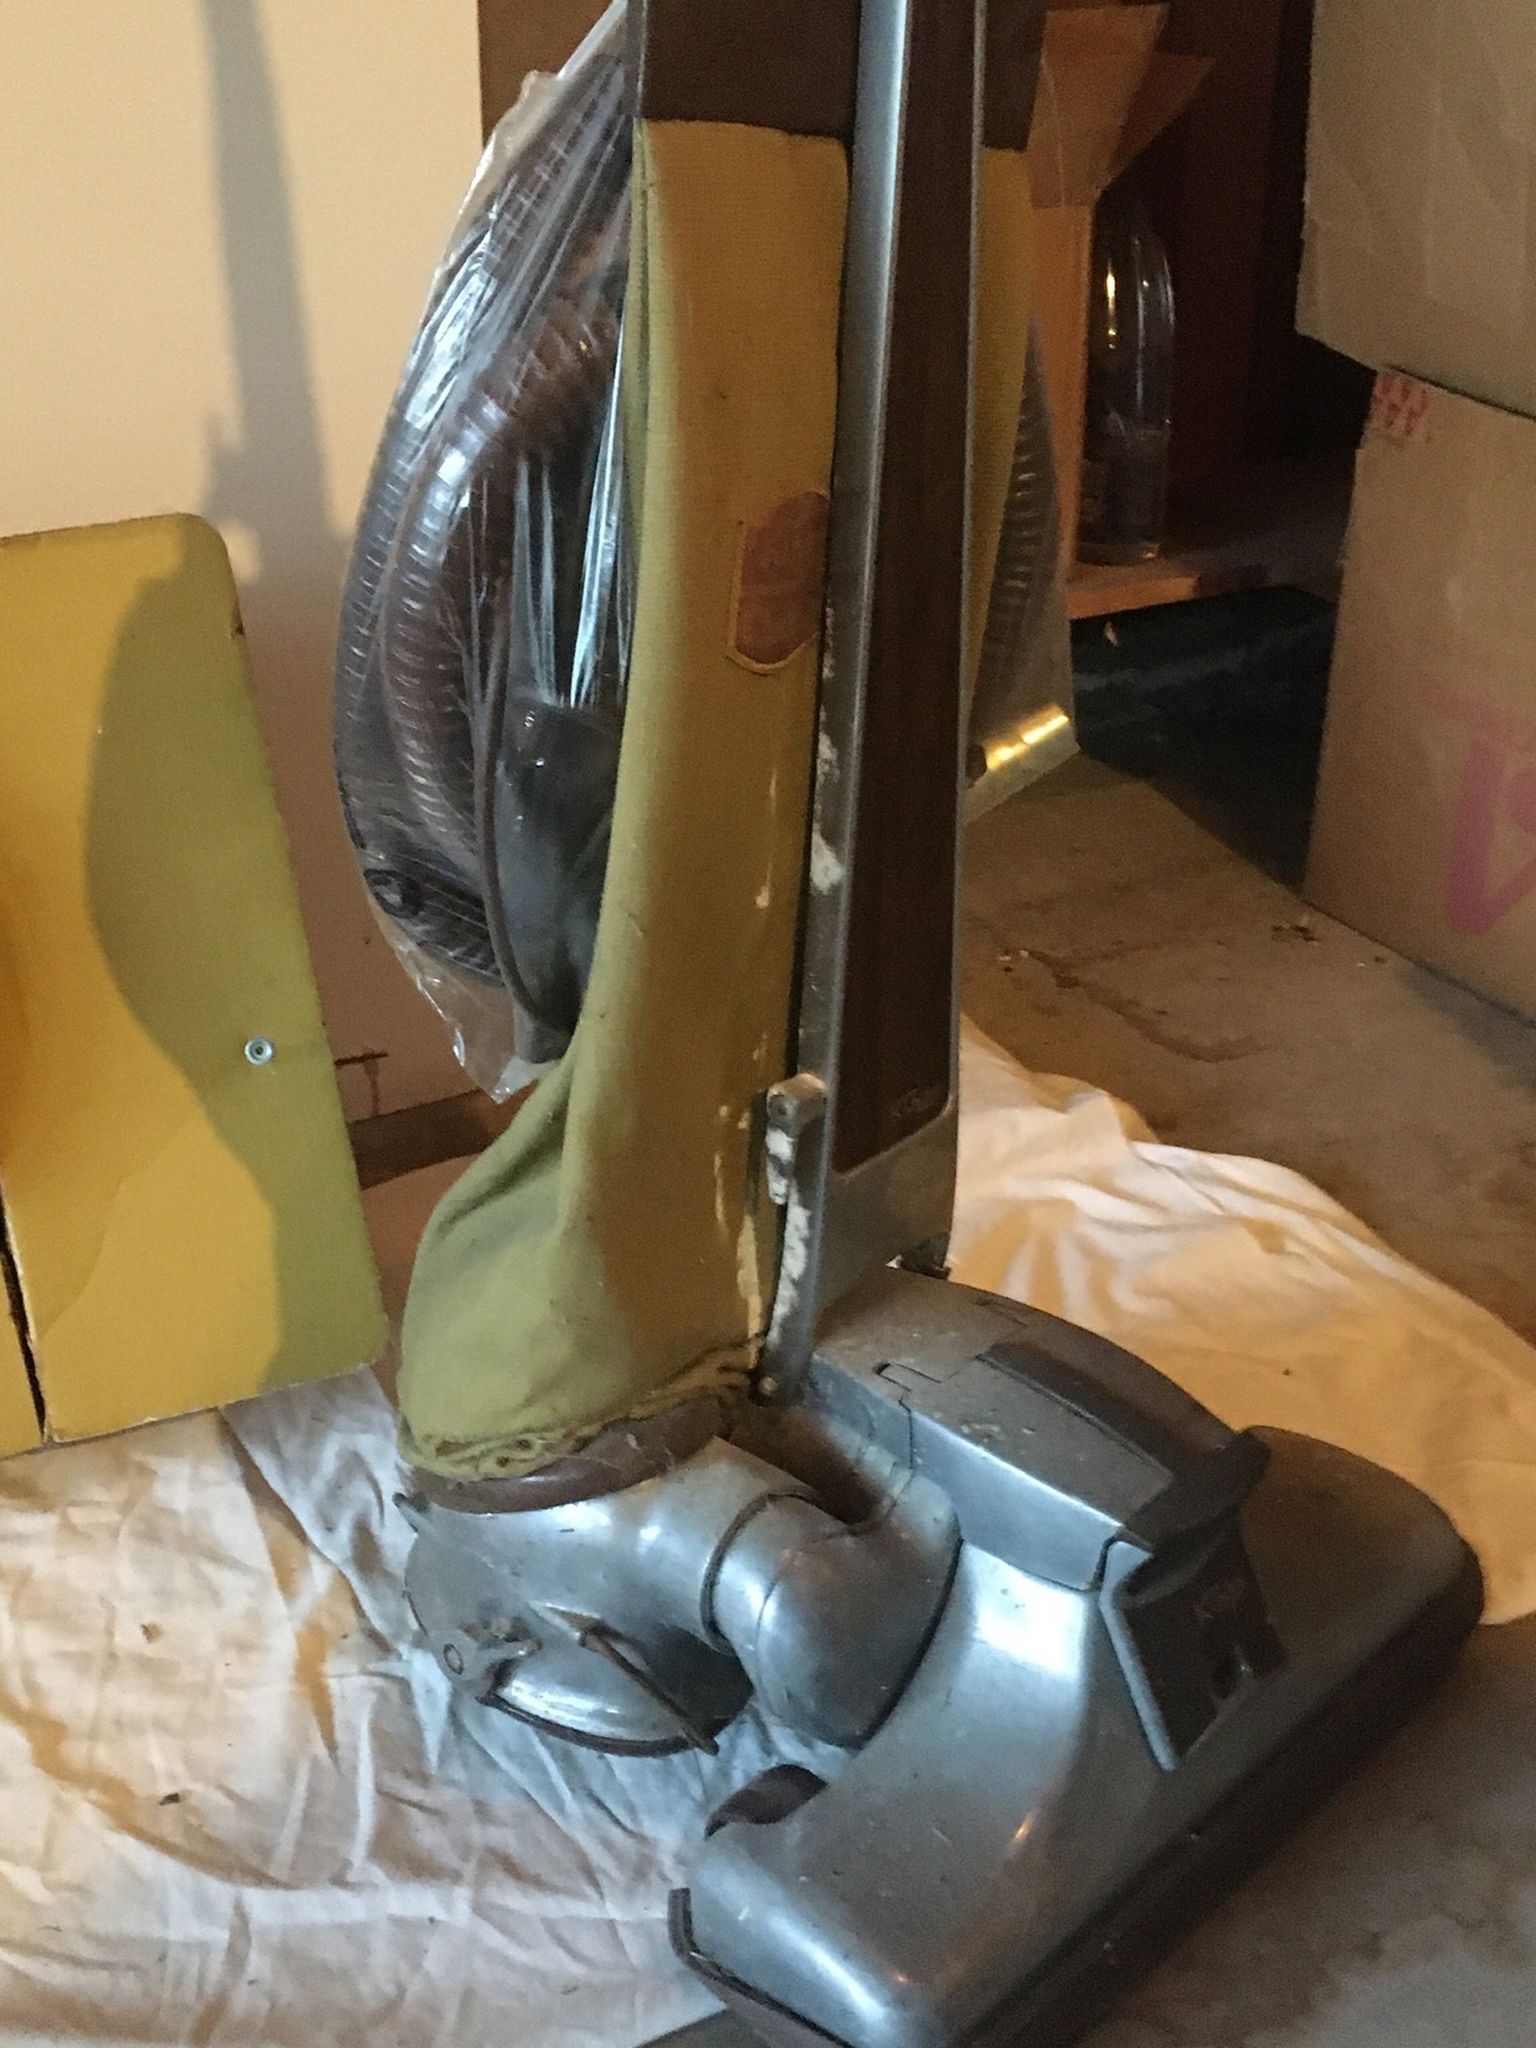 Kirby vacuum cleaner with accessories in original carrying case. A few years ago, we had the motor bearings replaced, then ended up buying new vacuum